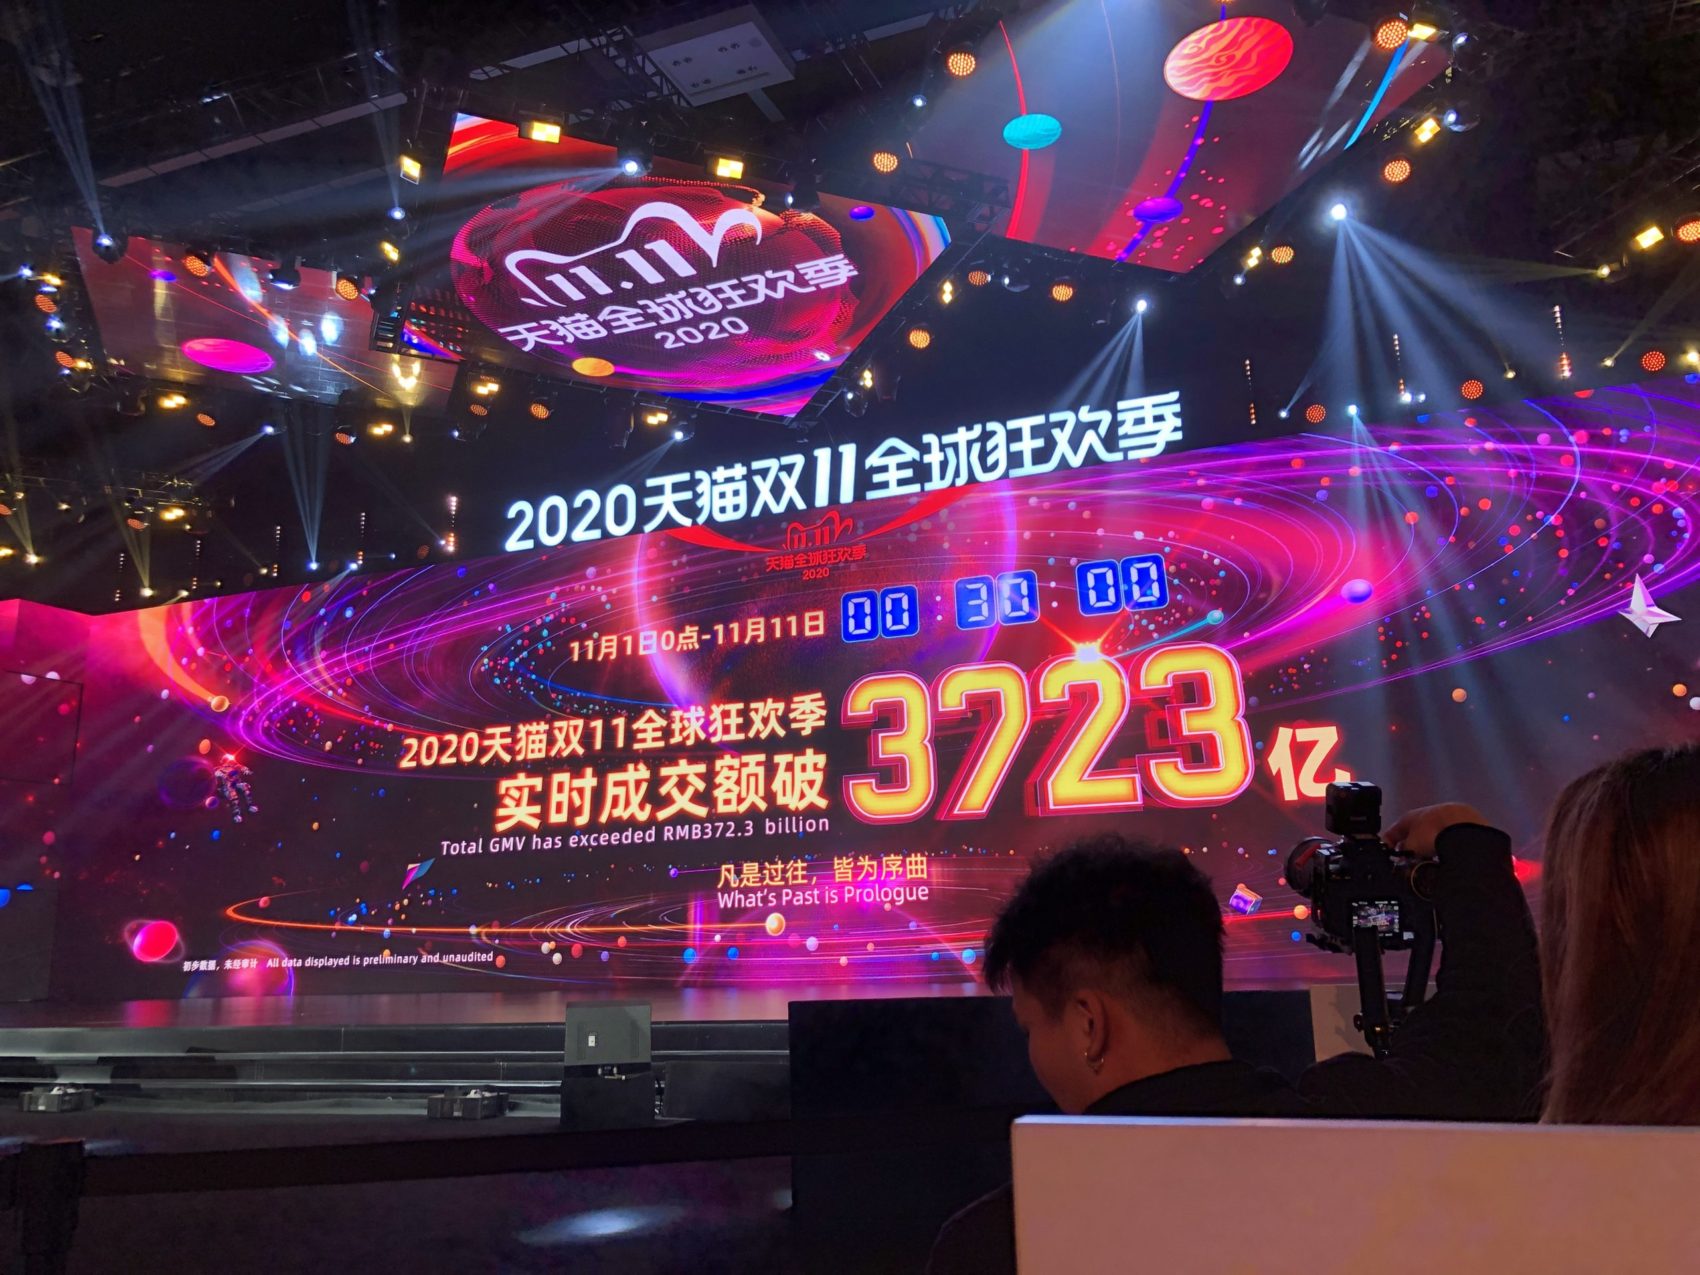 Singles' Day China 2020 - Record breaking